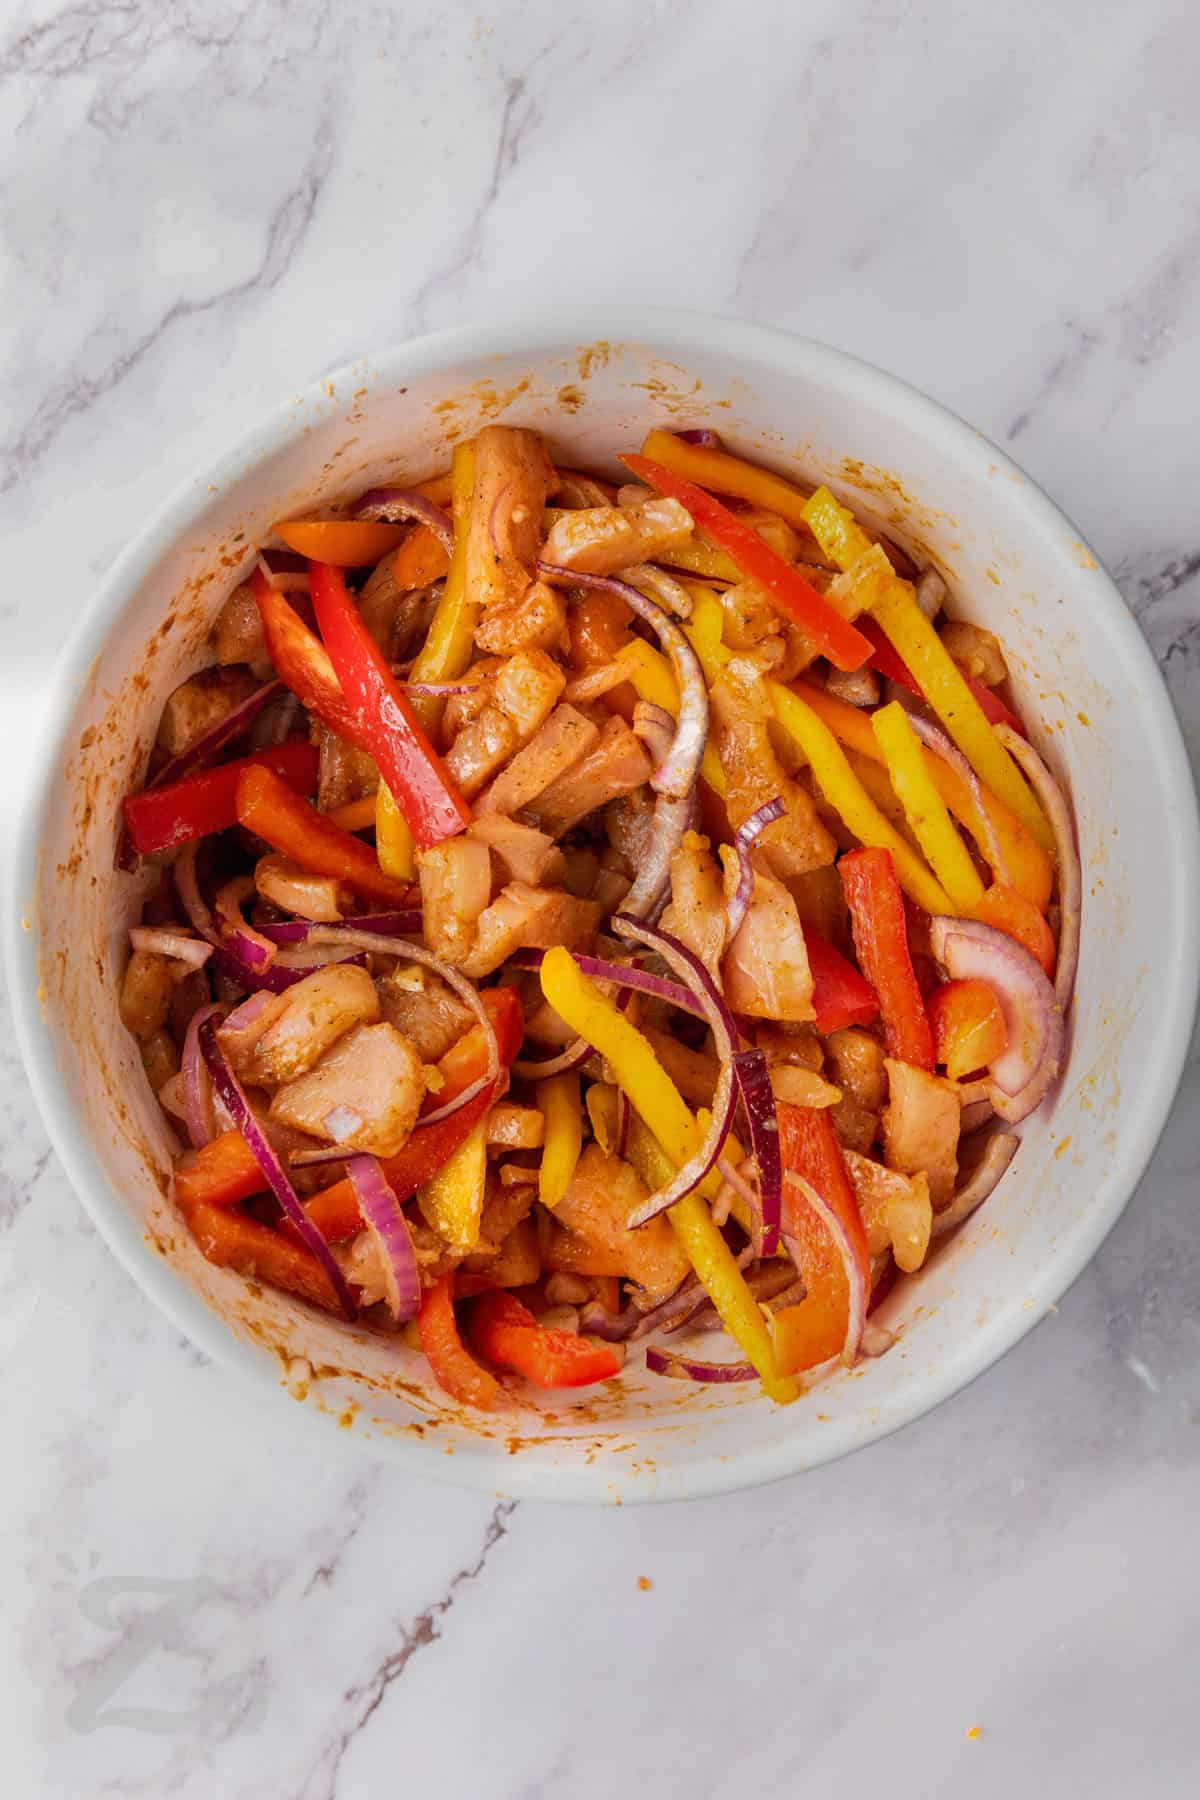 chicken breasts , red onions, and bell peppers tossed in seasoning in a bowl.